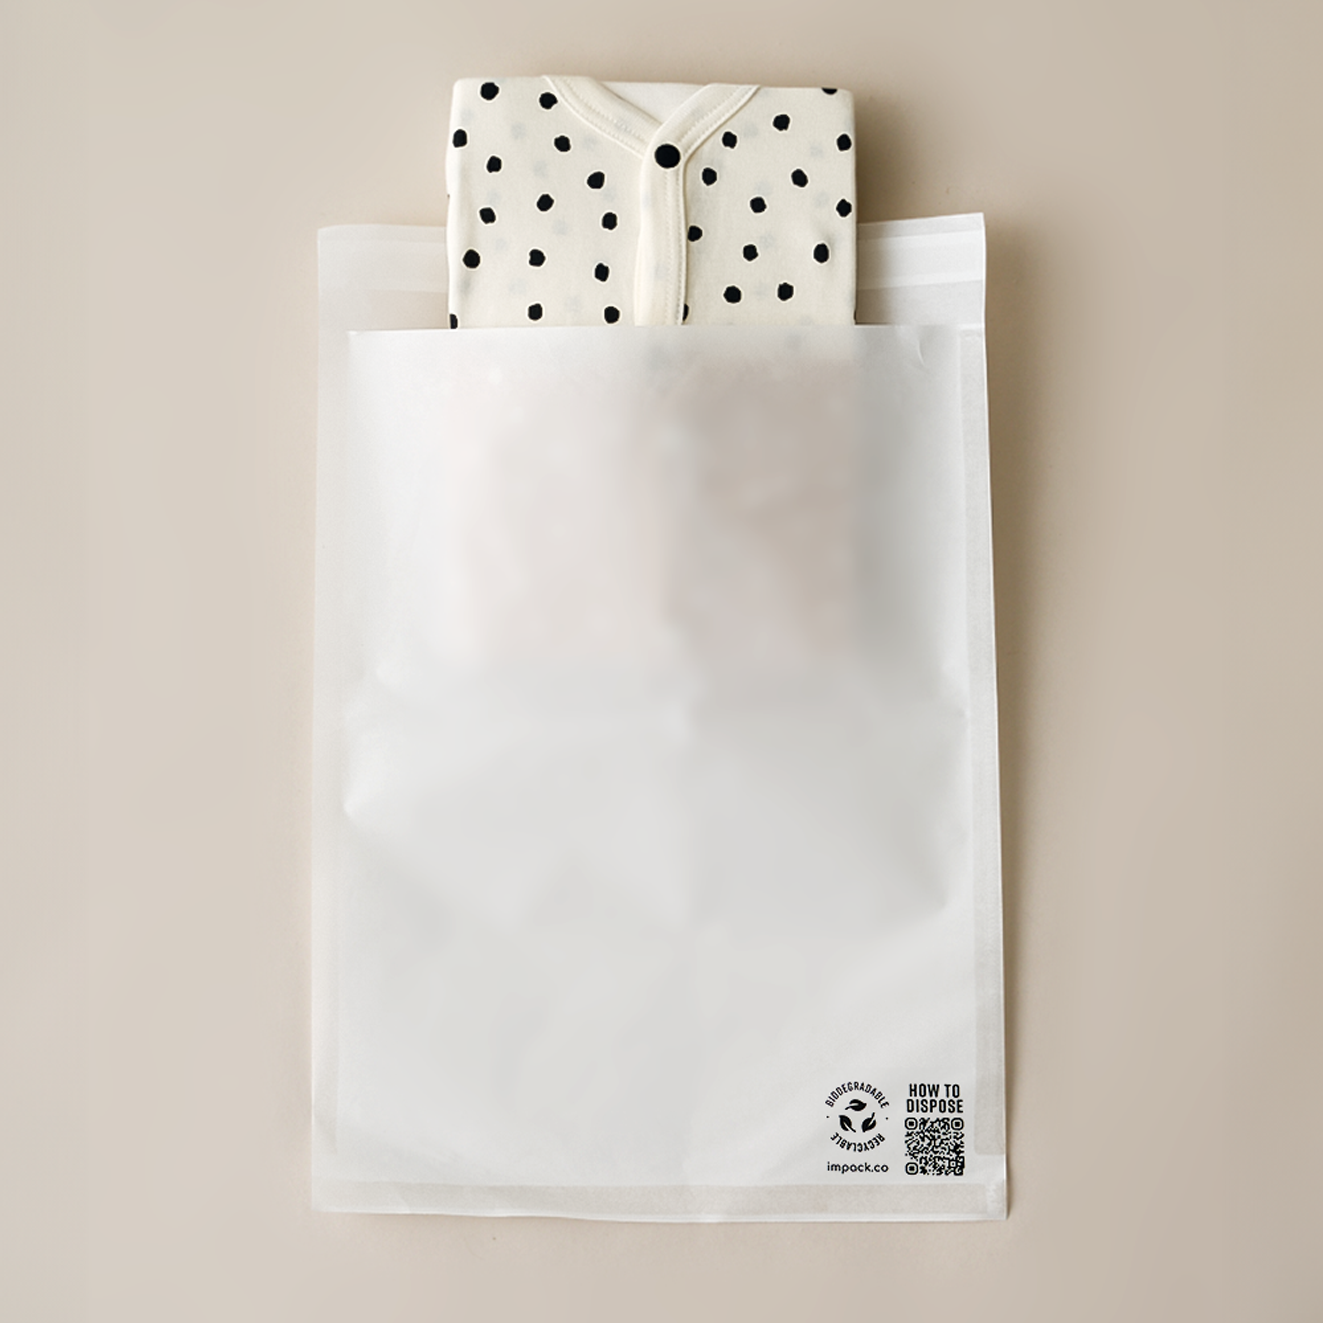 A white, partially transparent plastic packaging bag with recycling symbols and text on the front. A polka-dot fabric item is partially visible inside the impack.co Glassine Bags 9.6" x 12.6", protruding from the top.